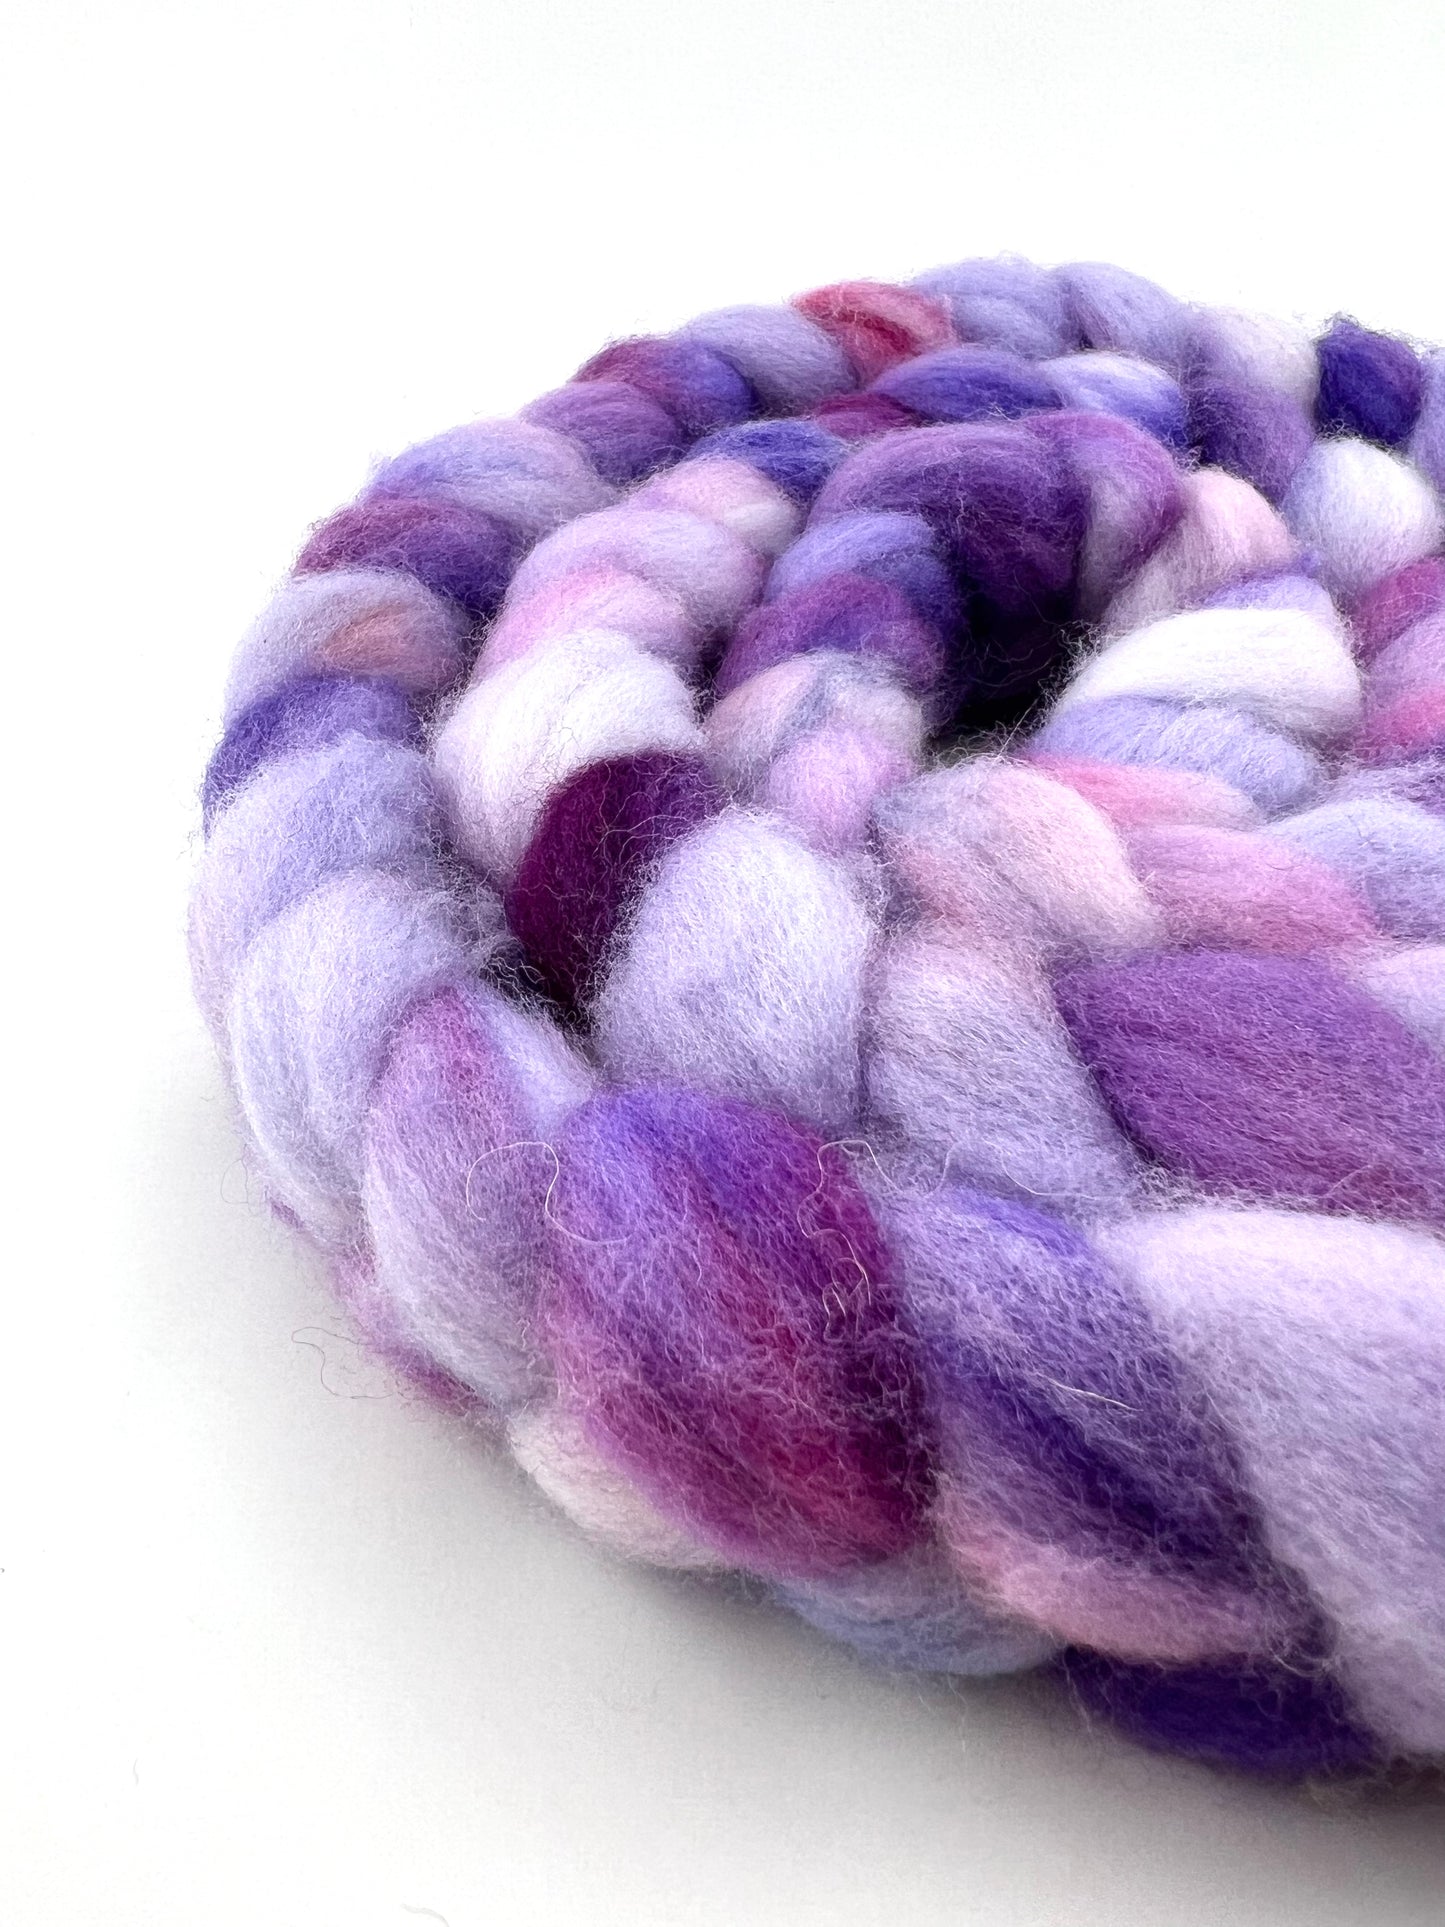 PURPLE PEOPLE EATER Hand Dyed Spinning Fibre Purples Polwarth Top Non Superwash